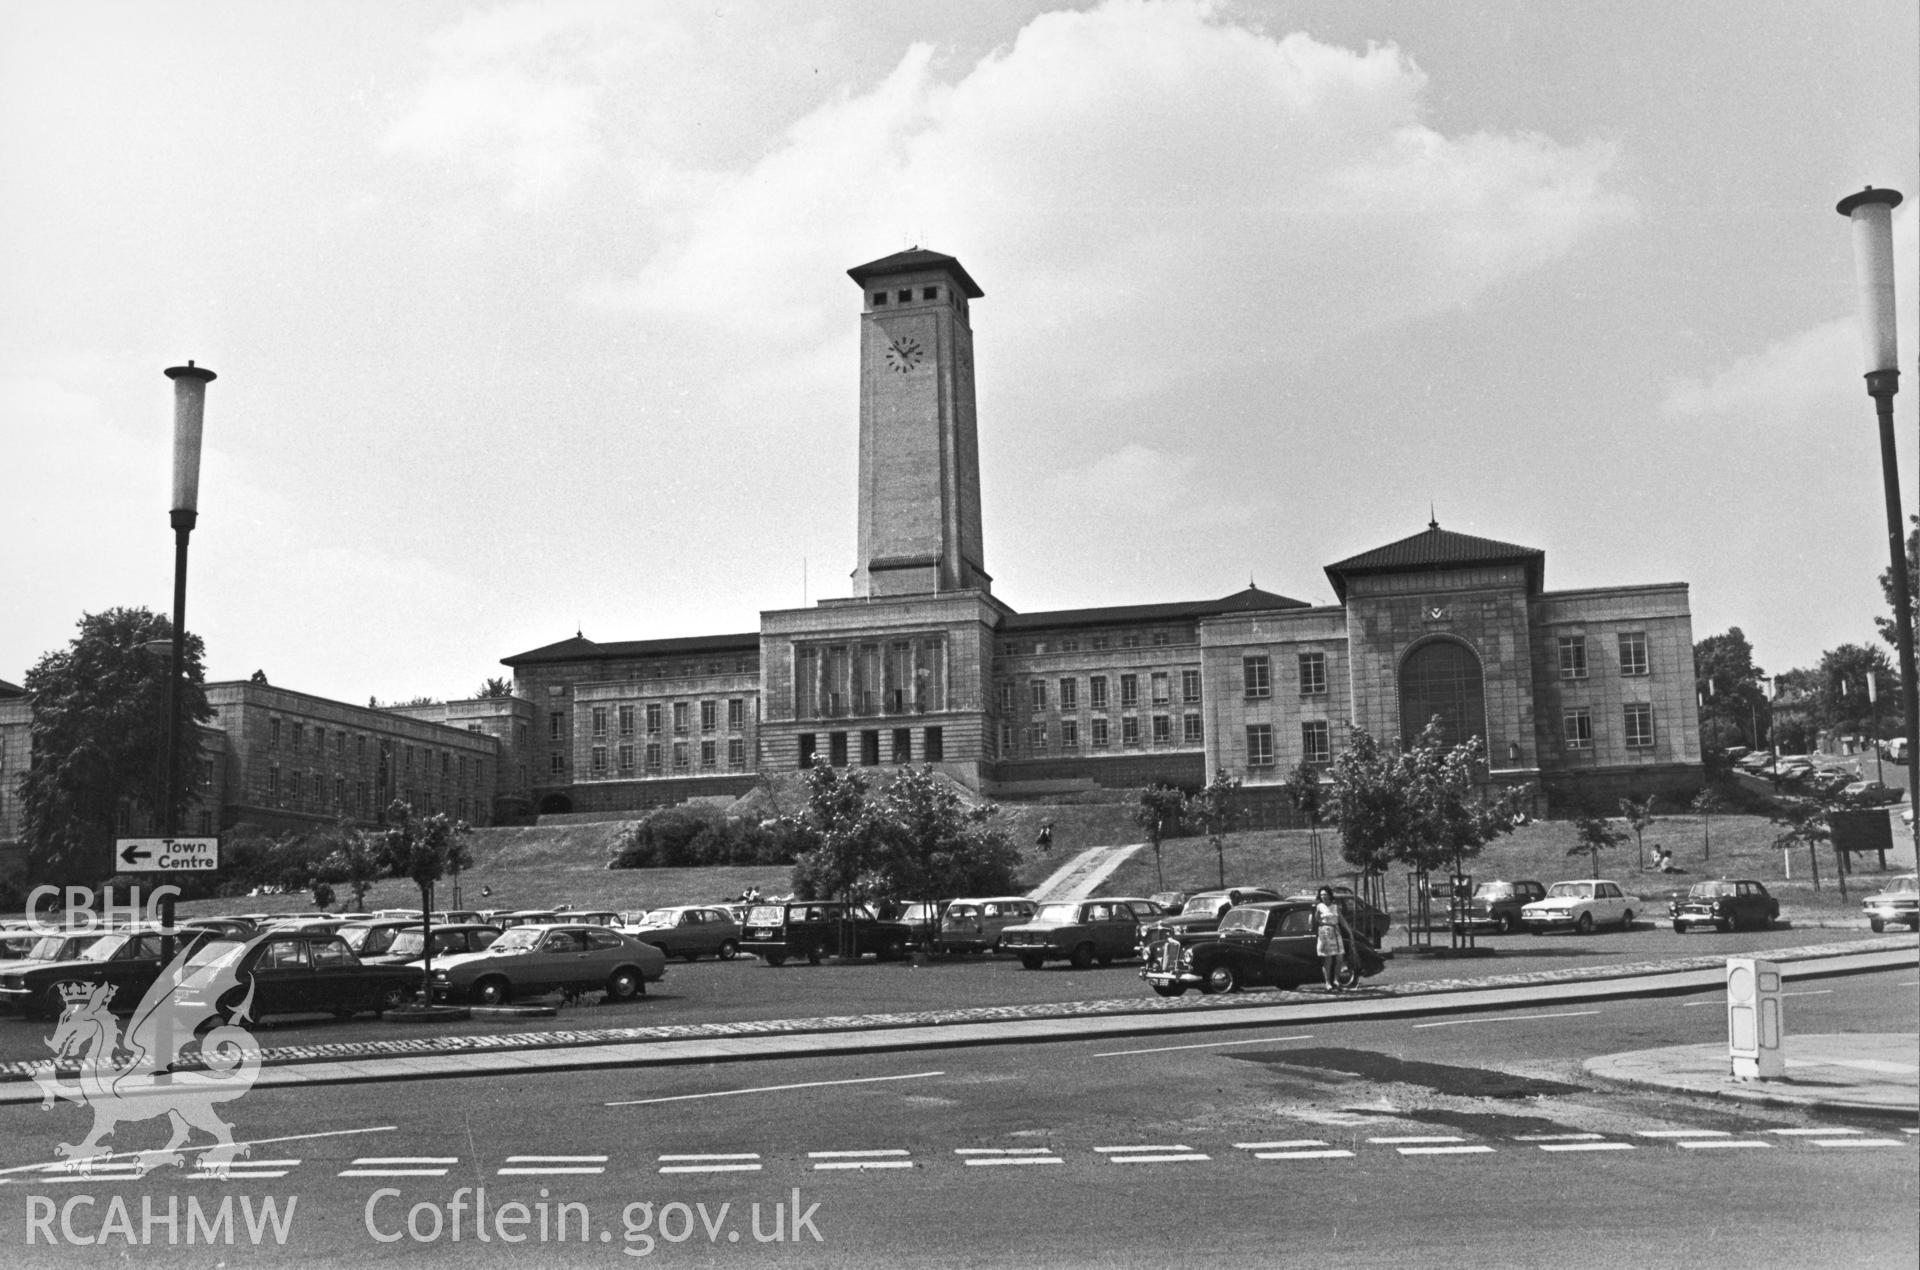 1 b/w print showing exterior view of Newport Civic Centre with car park in foreground; collated by the former Central Office of Information.